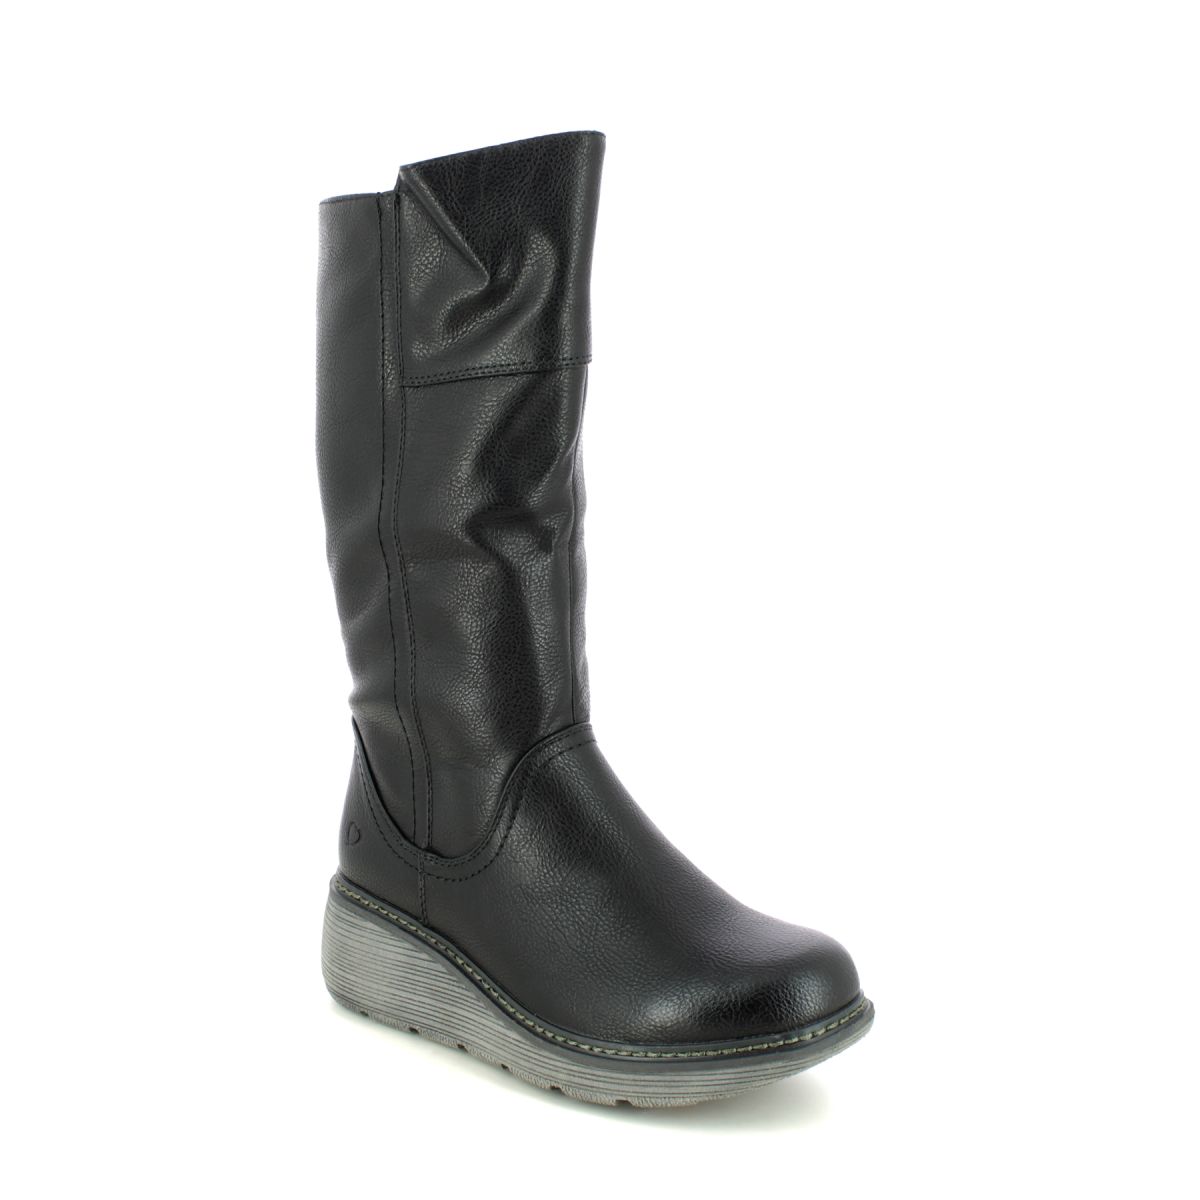 Heavenly Feet Lombardy Wedge Black Womens Mid Calf Boots 3005-34 In Size 6 In Plain Black